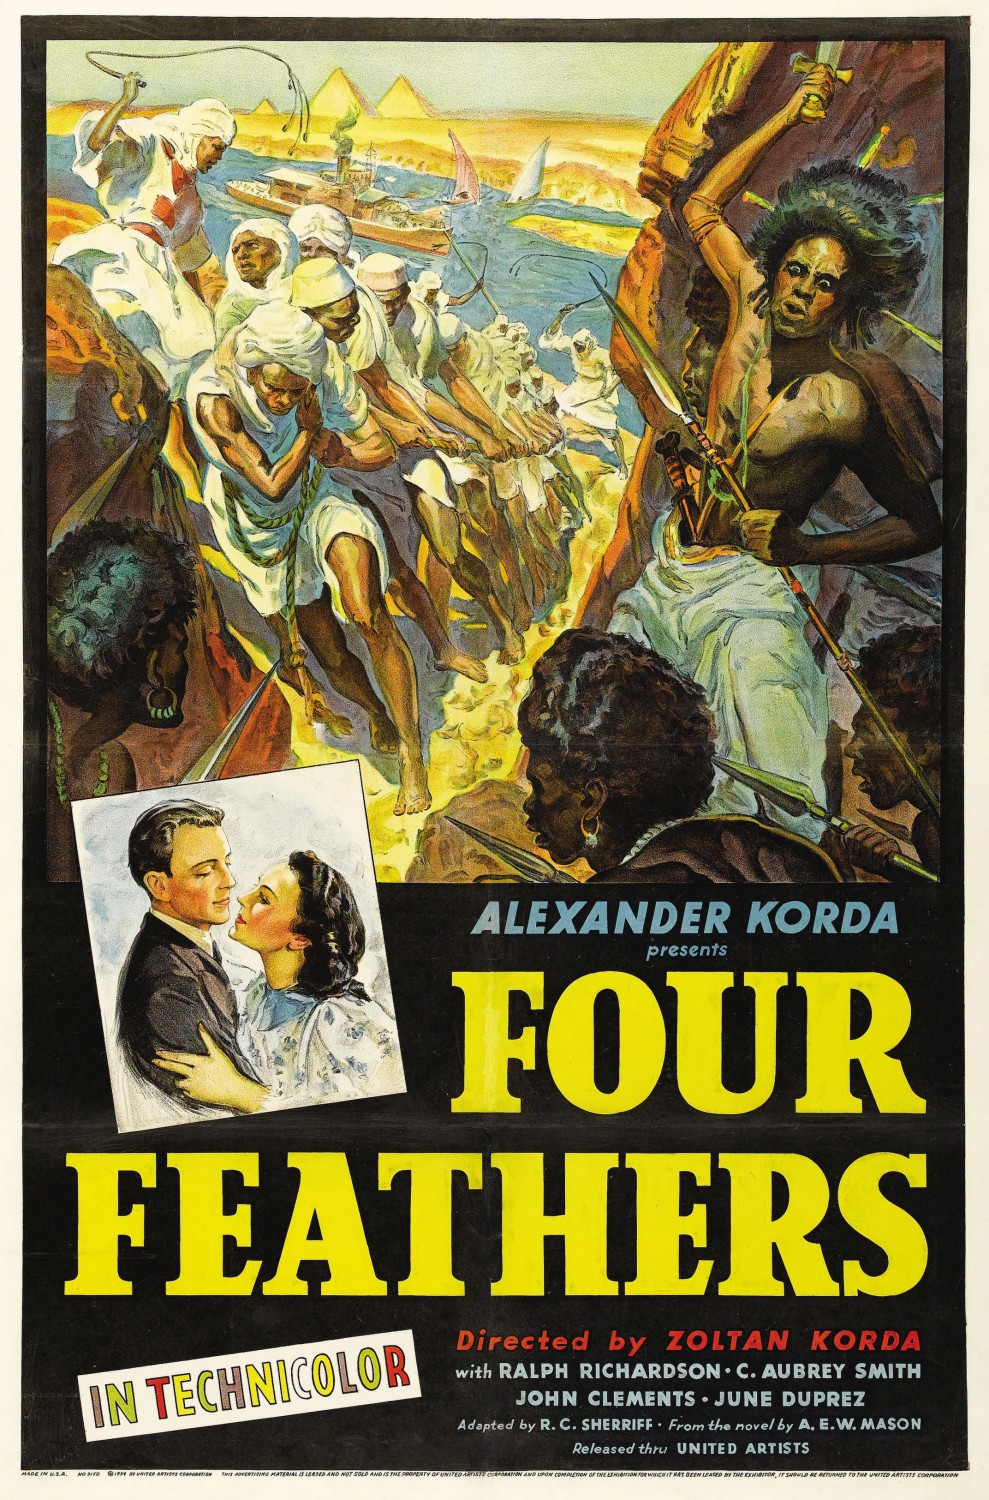 Extra Large Movie Poster Image for The Four Feathers 